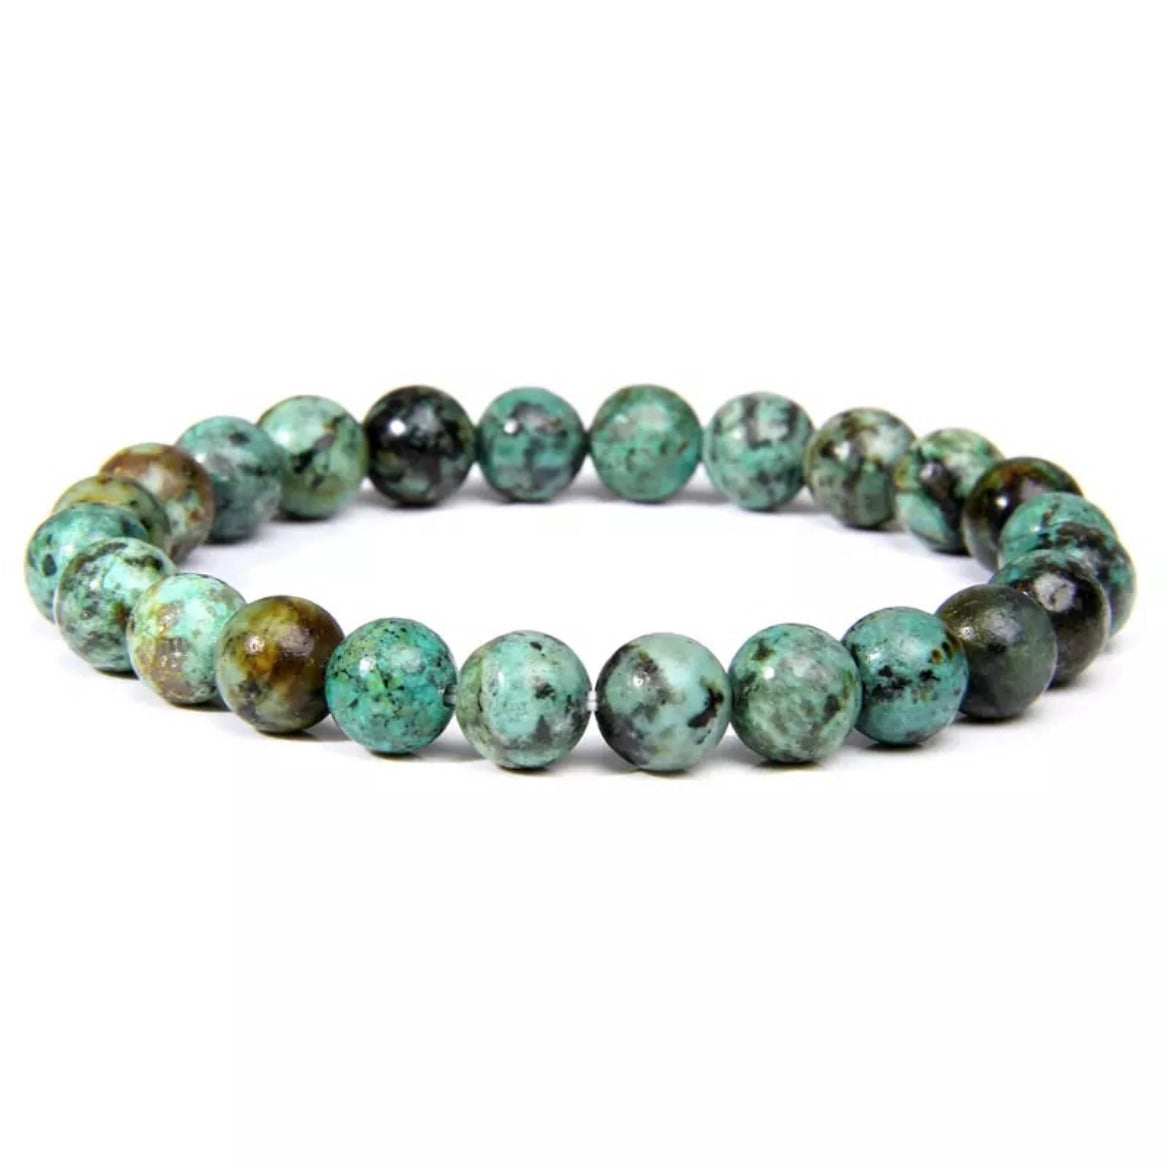 African Turquoise Bead Bracelet Bracelets The Crystal and Wellness Warehouse 